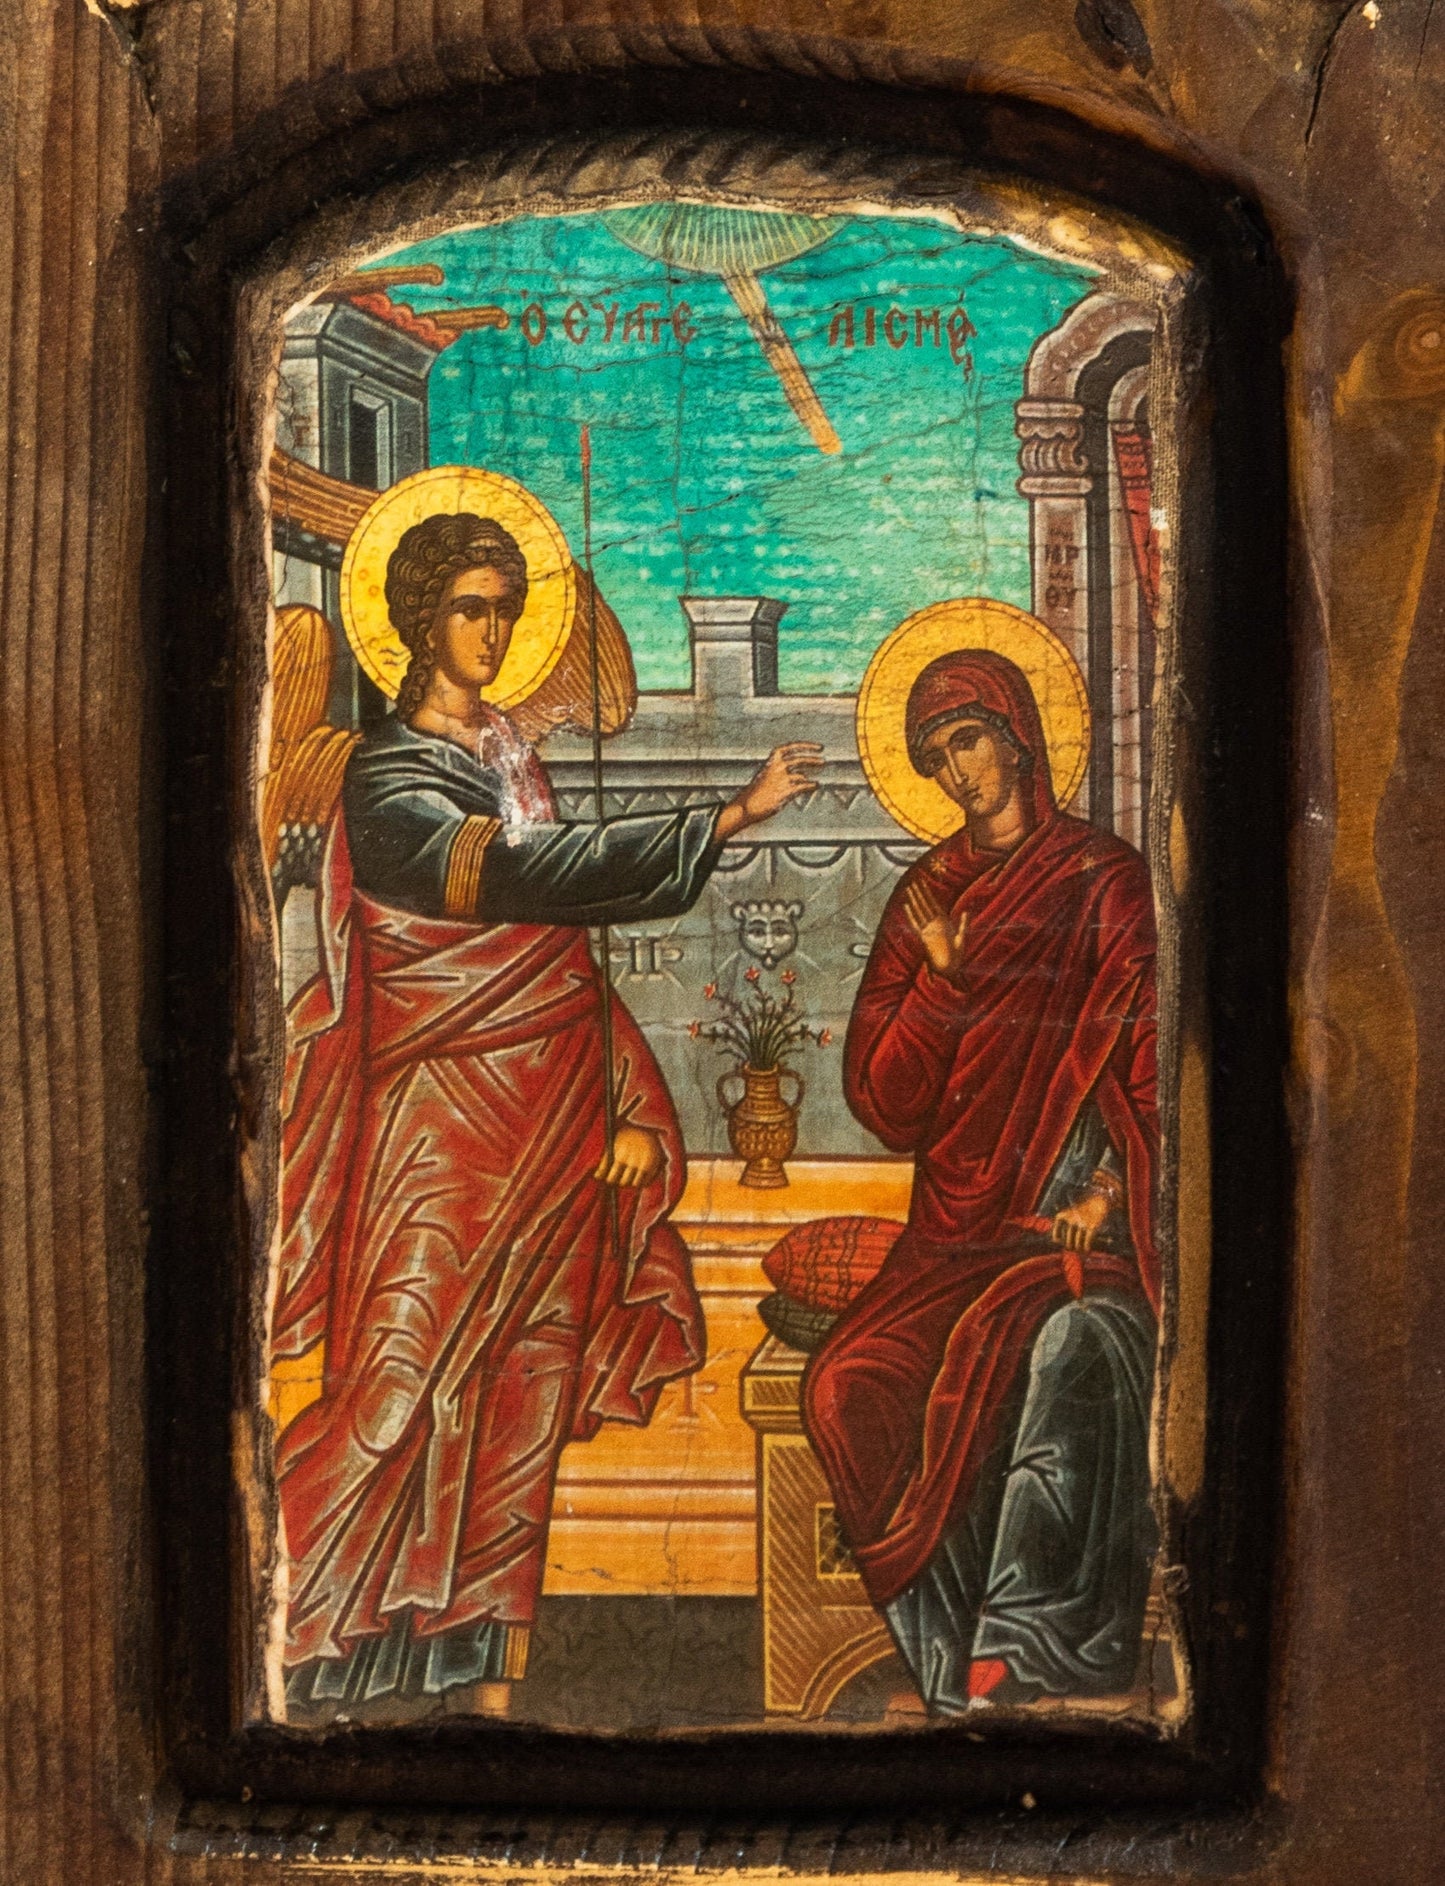 The Annunciation Virgin Mary icon, Handmade Greek Orthodox icon of Theotokos, Mother of God Byzantine art wall hanging canvas wood icon TheHolyArt